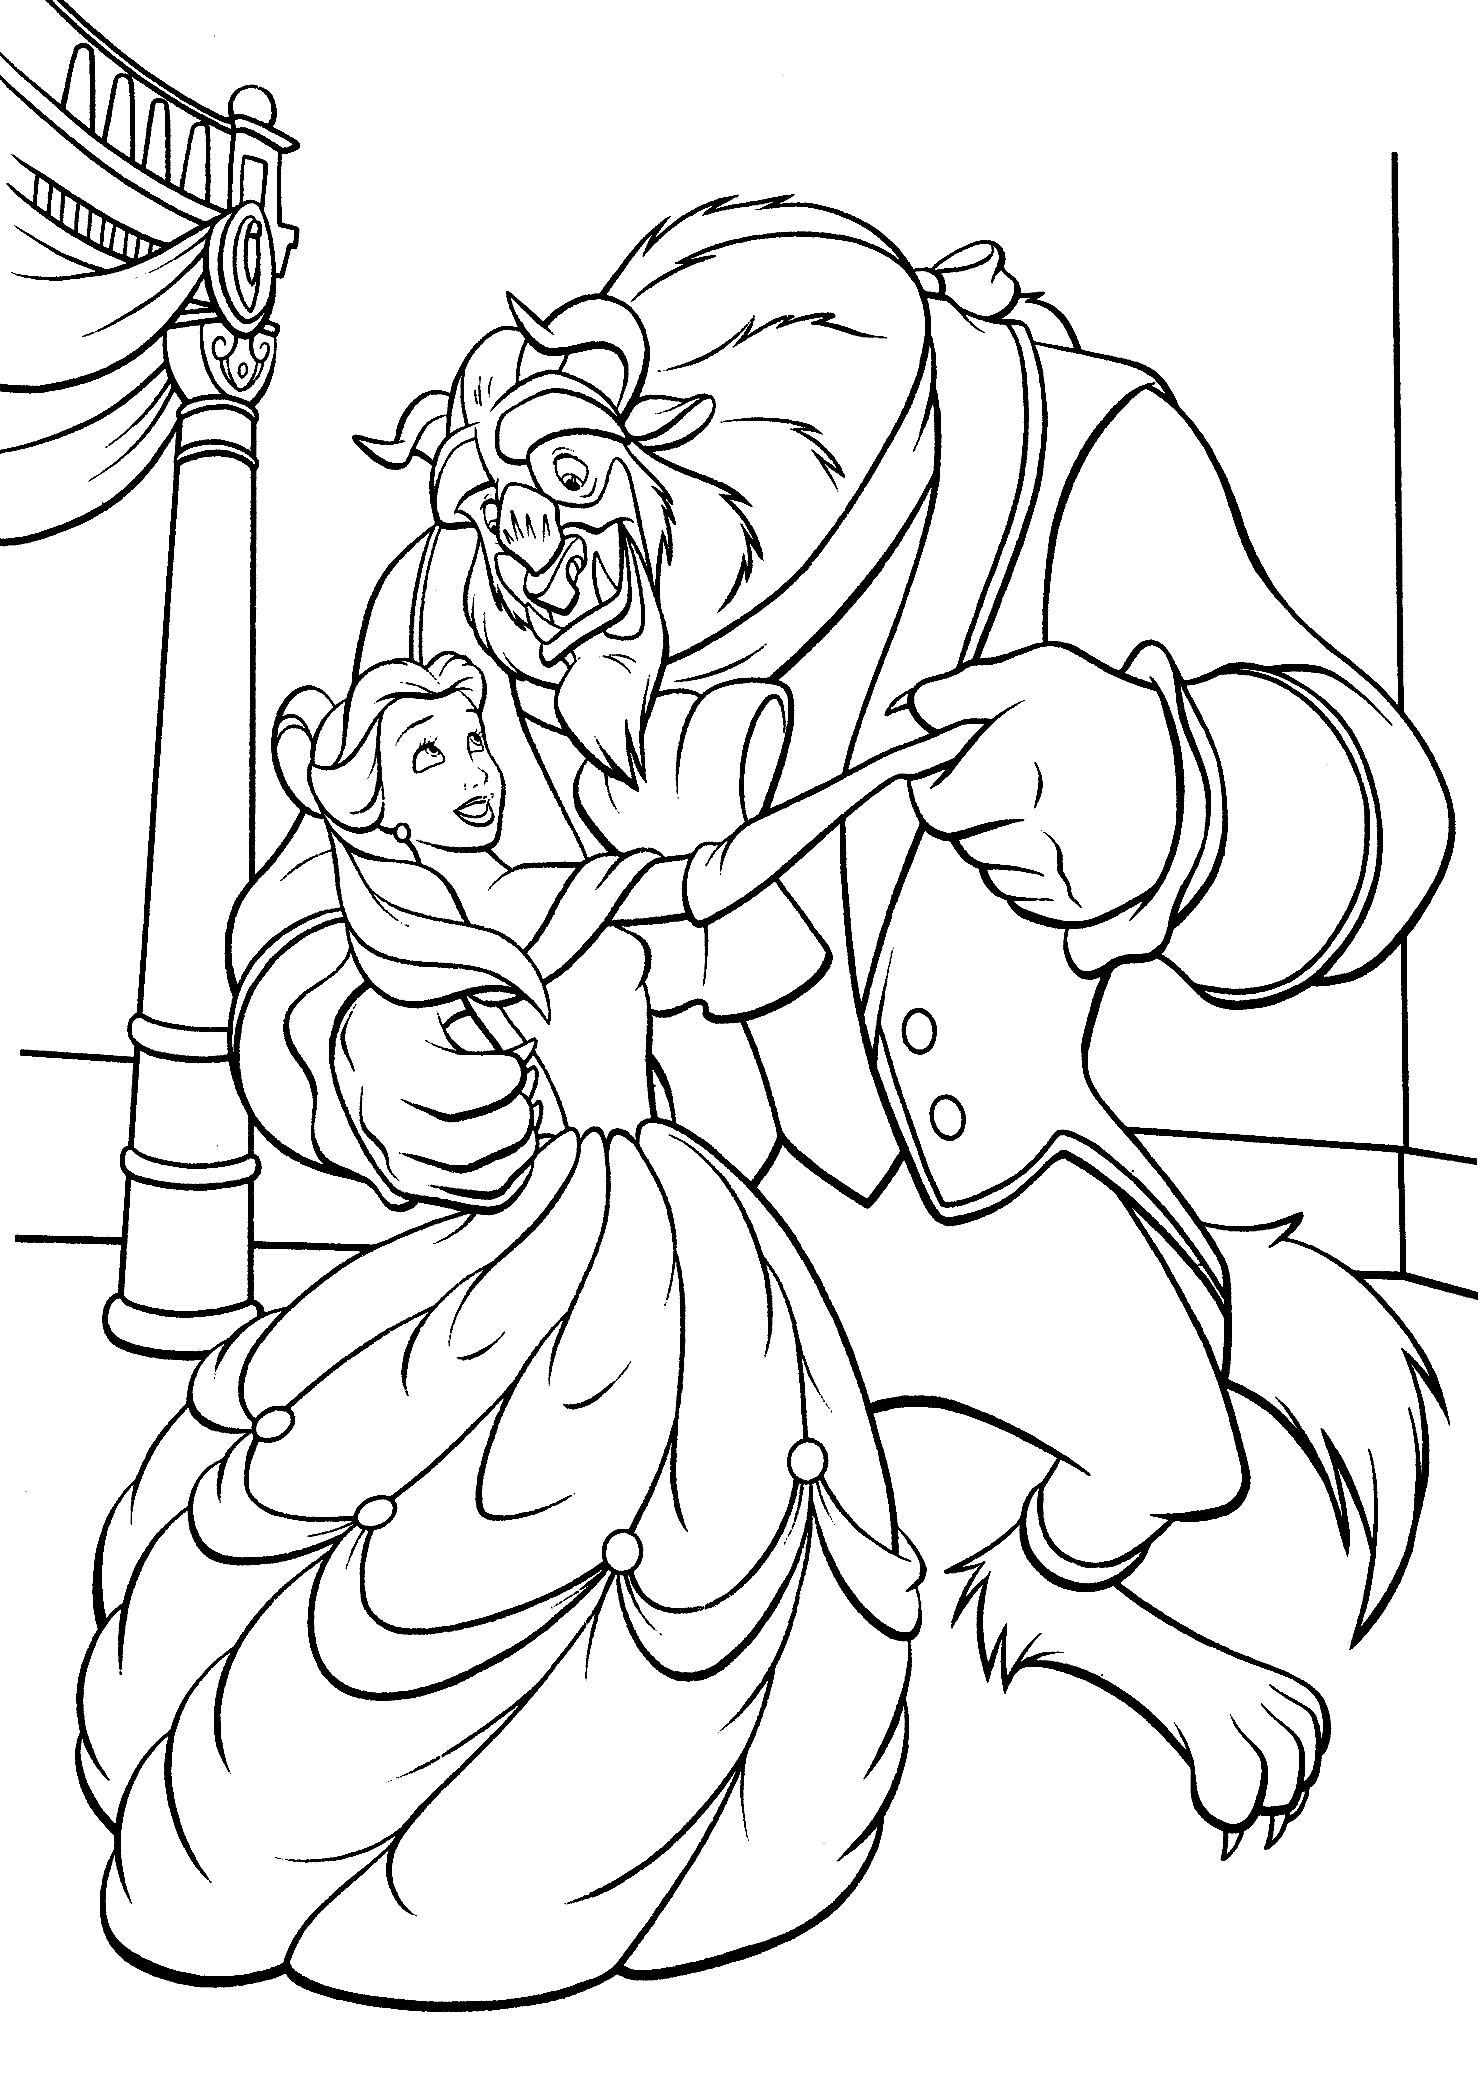 beauty and the beast coloring pages walt disney pictures cute kawaii resources page 2 coloring the and pages beauty beast 